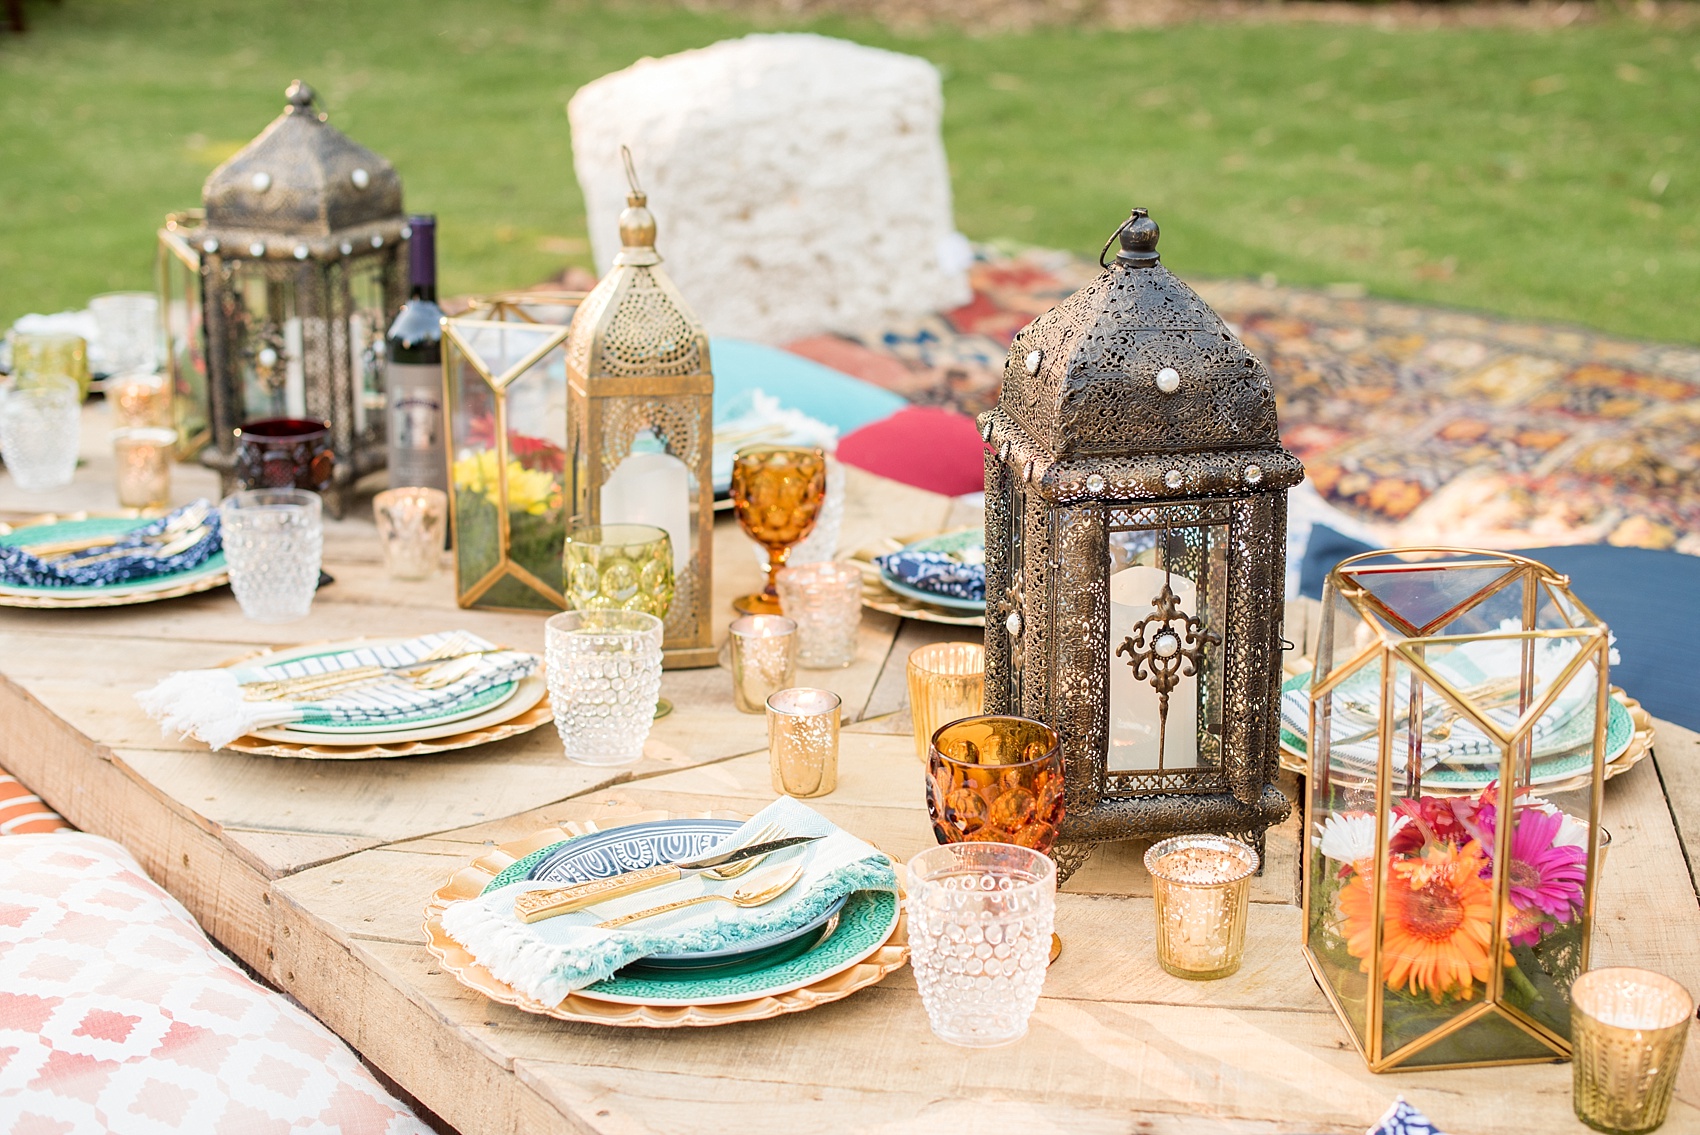 Mikkel Paige Photography photo of Moroccan lanterns for a themed surprise party with bright colors.